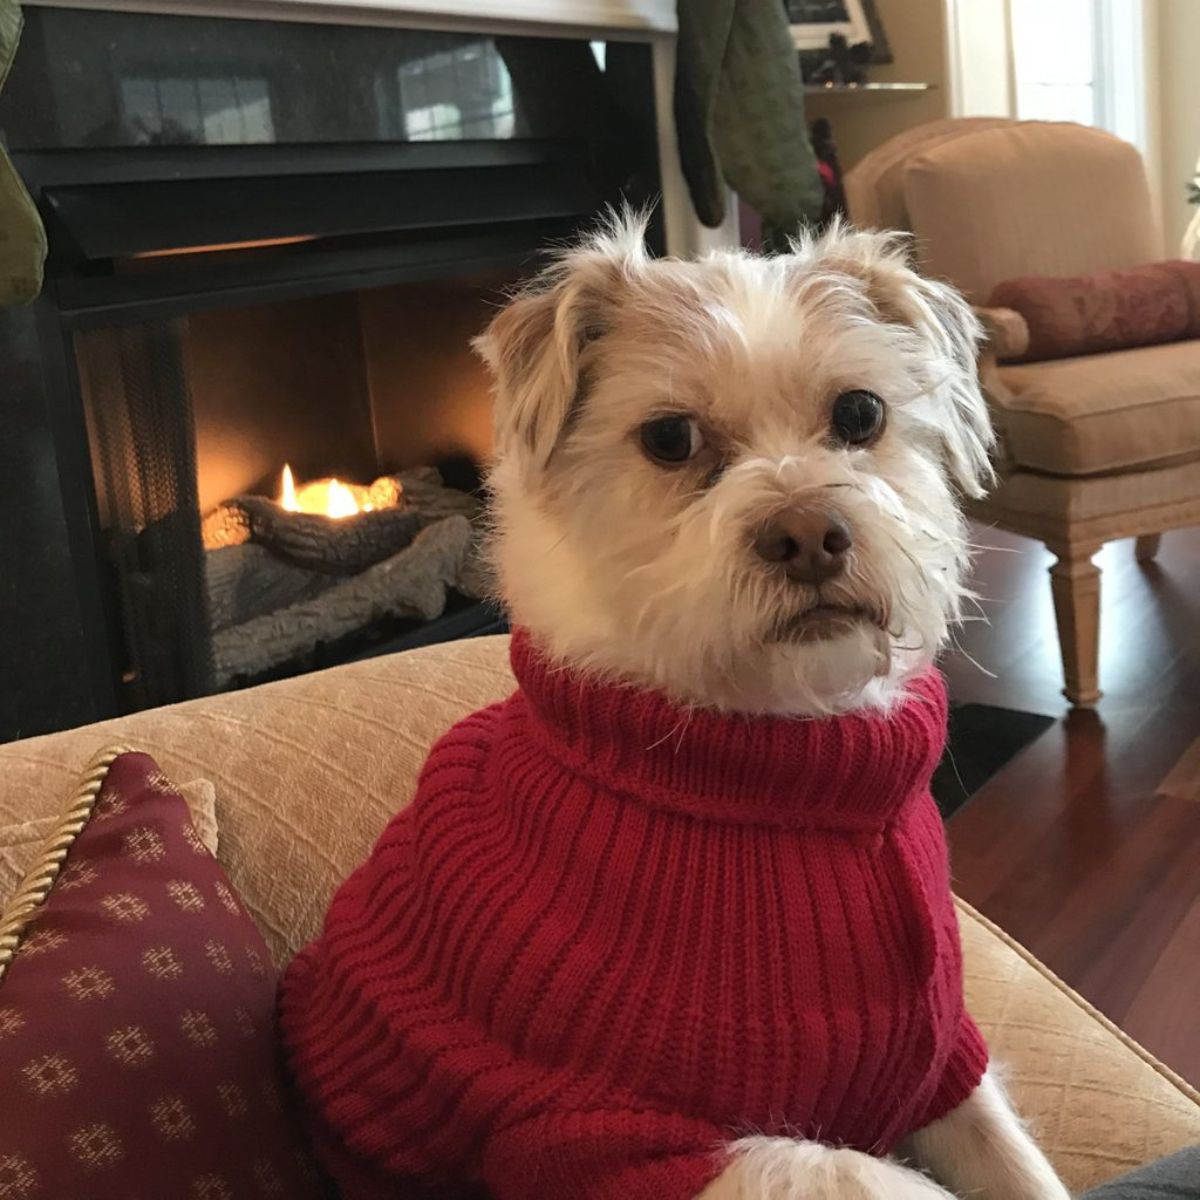 fluffy white dog sitting on a brown chair wearing a red sweater looking angry